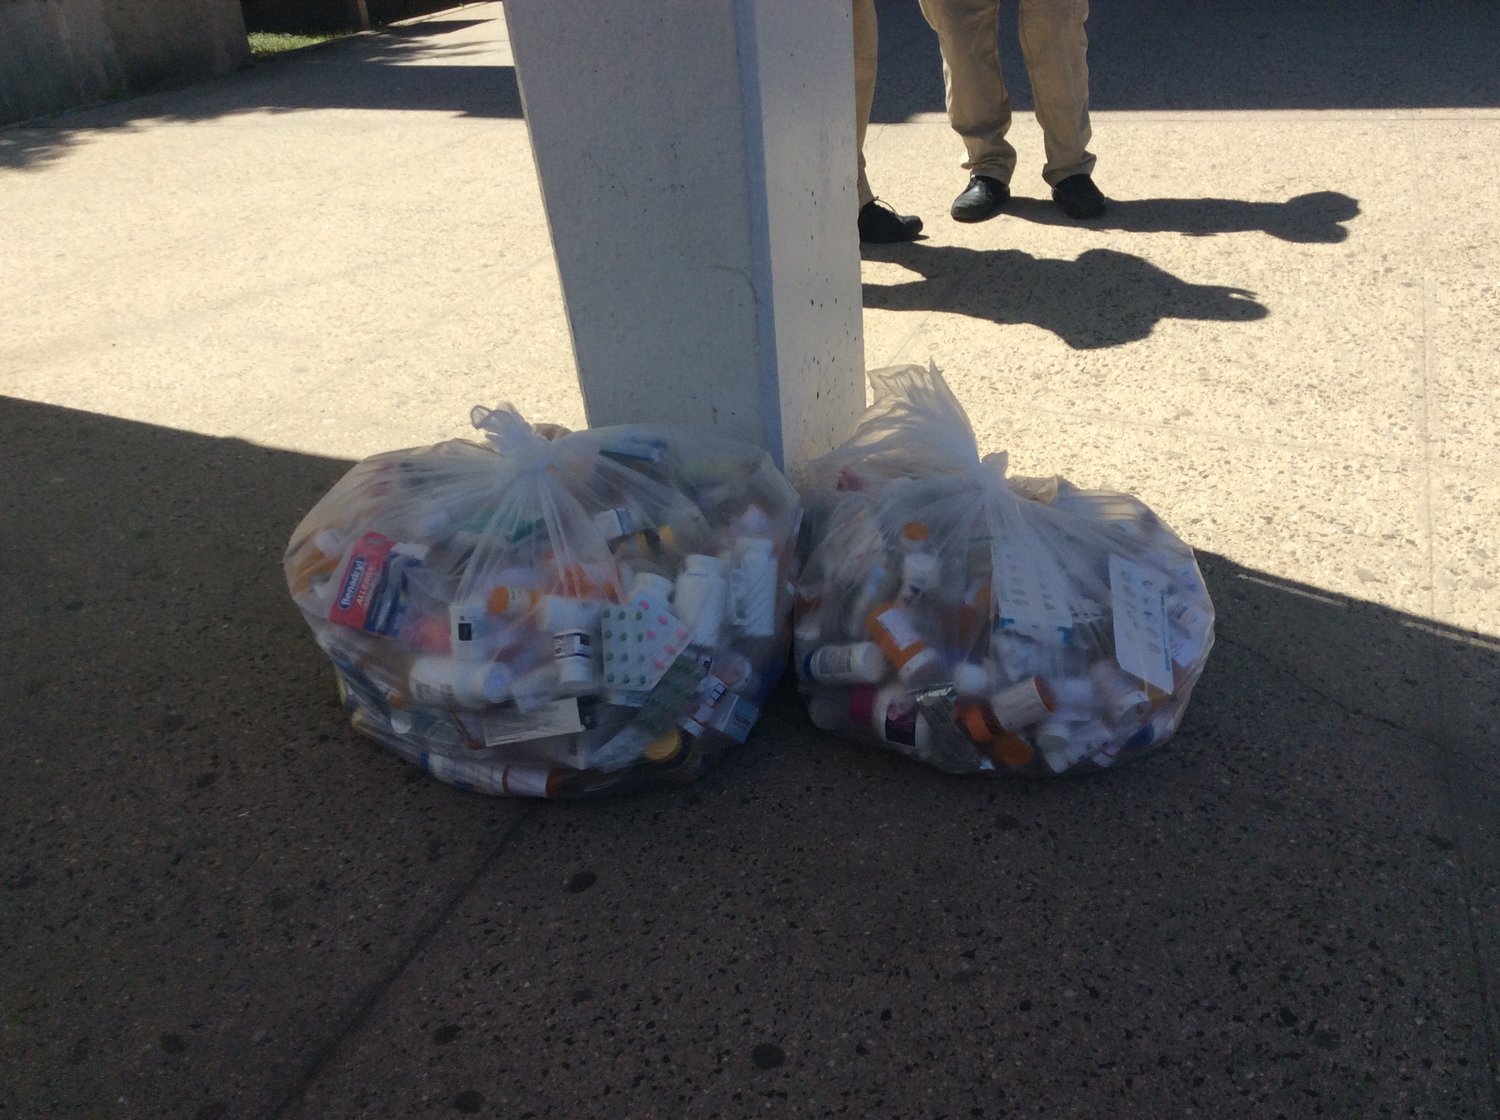 More than 70 pounds of drugs were collected during the recent drug take back day with the Oceanside Safe Coalition.